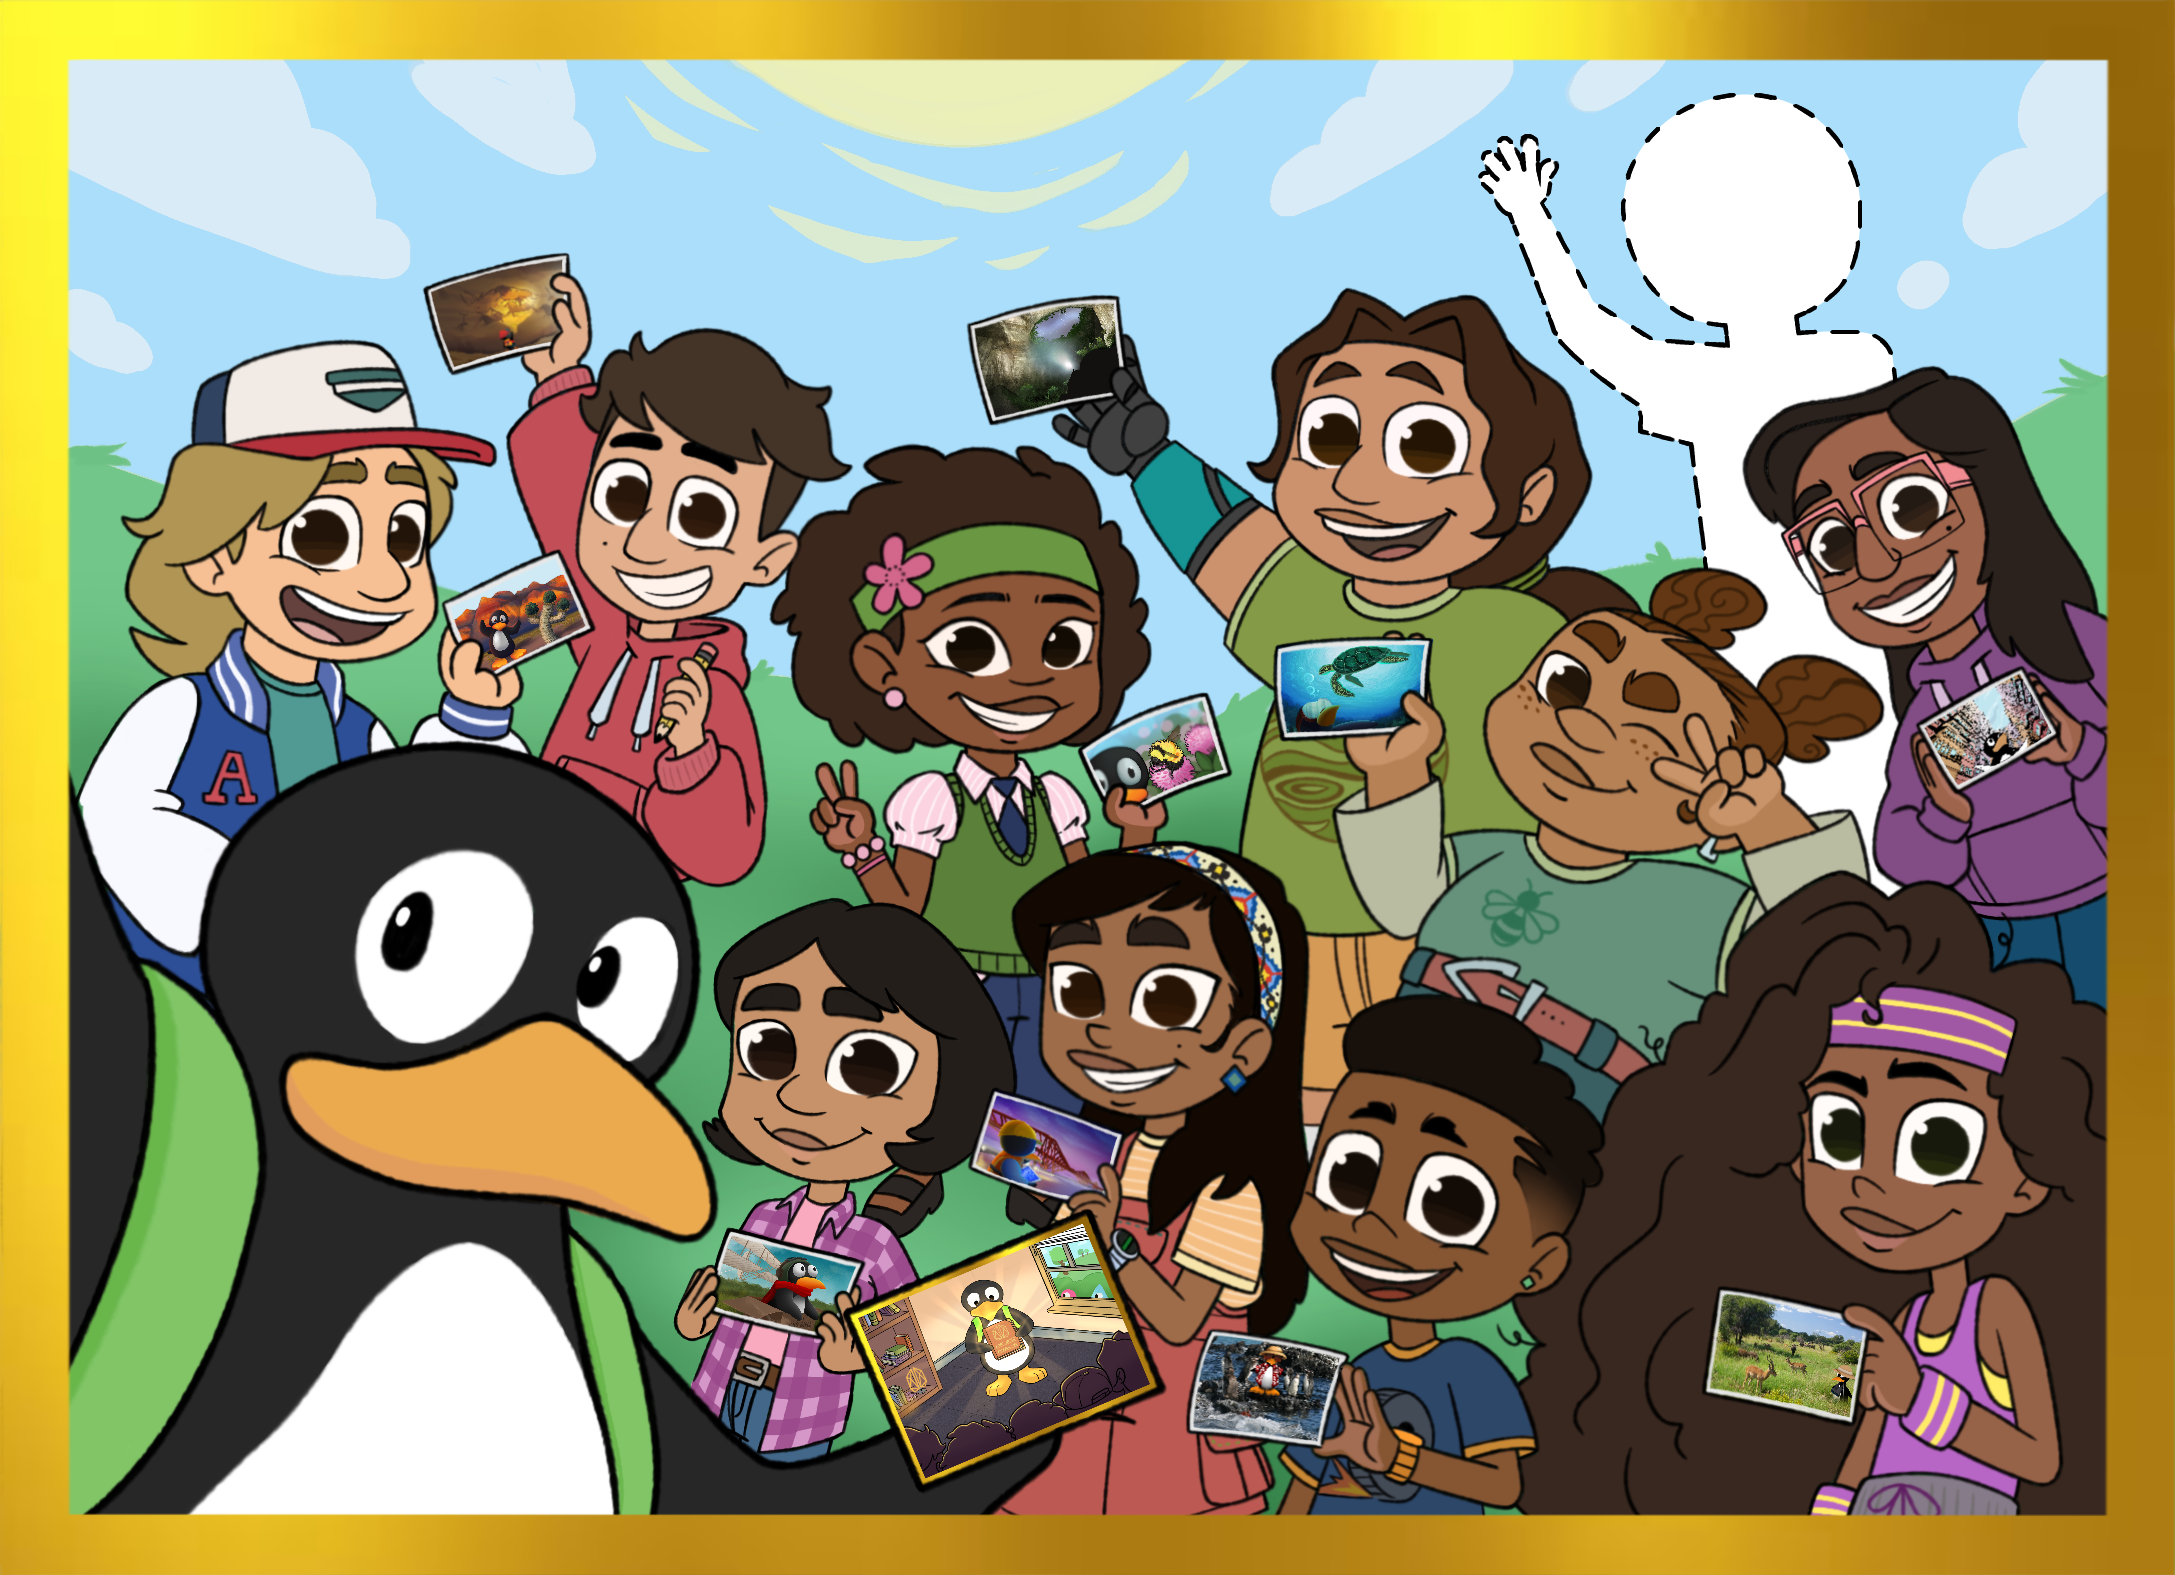 A full color image of JiJi taking a selfie with 10 childredn, each holding a postcard